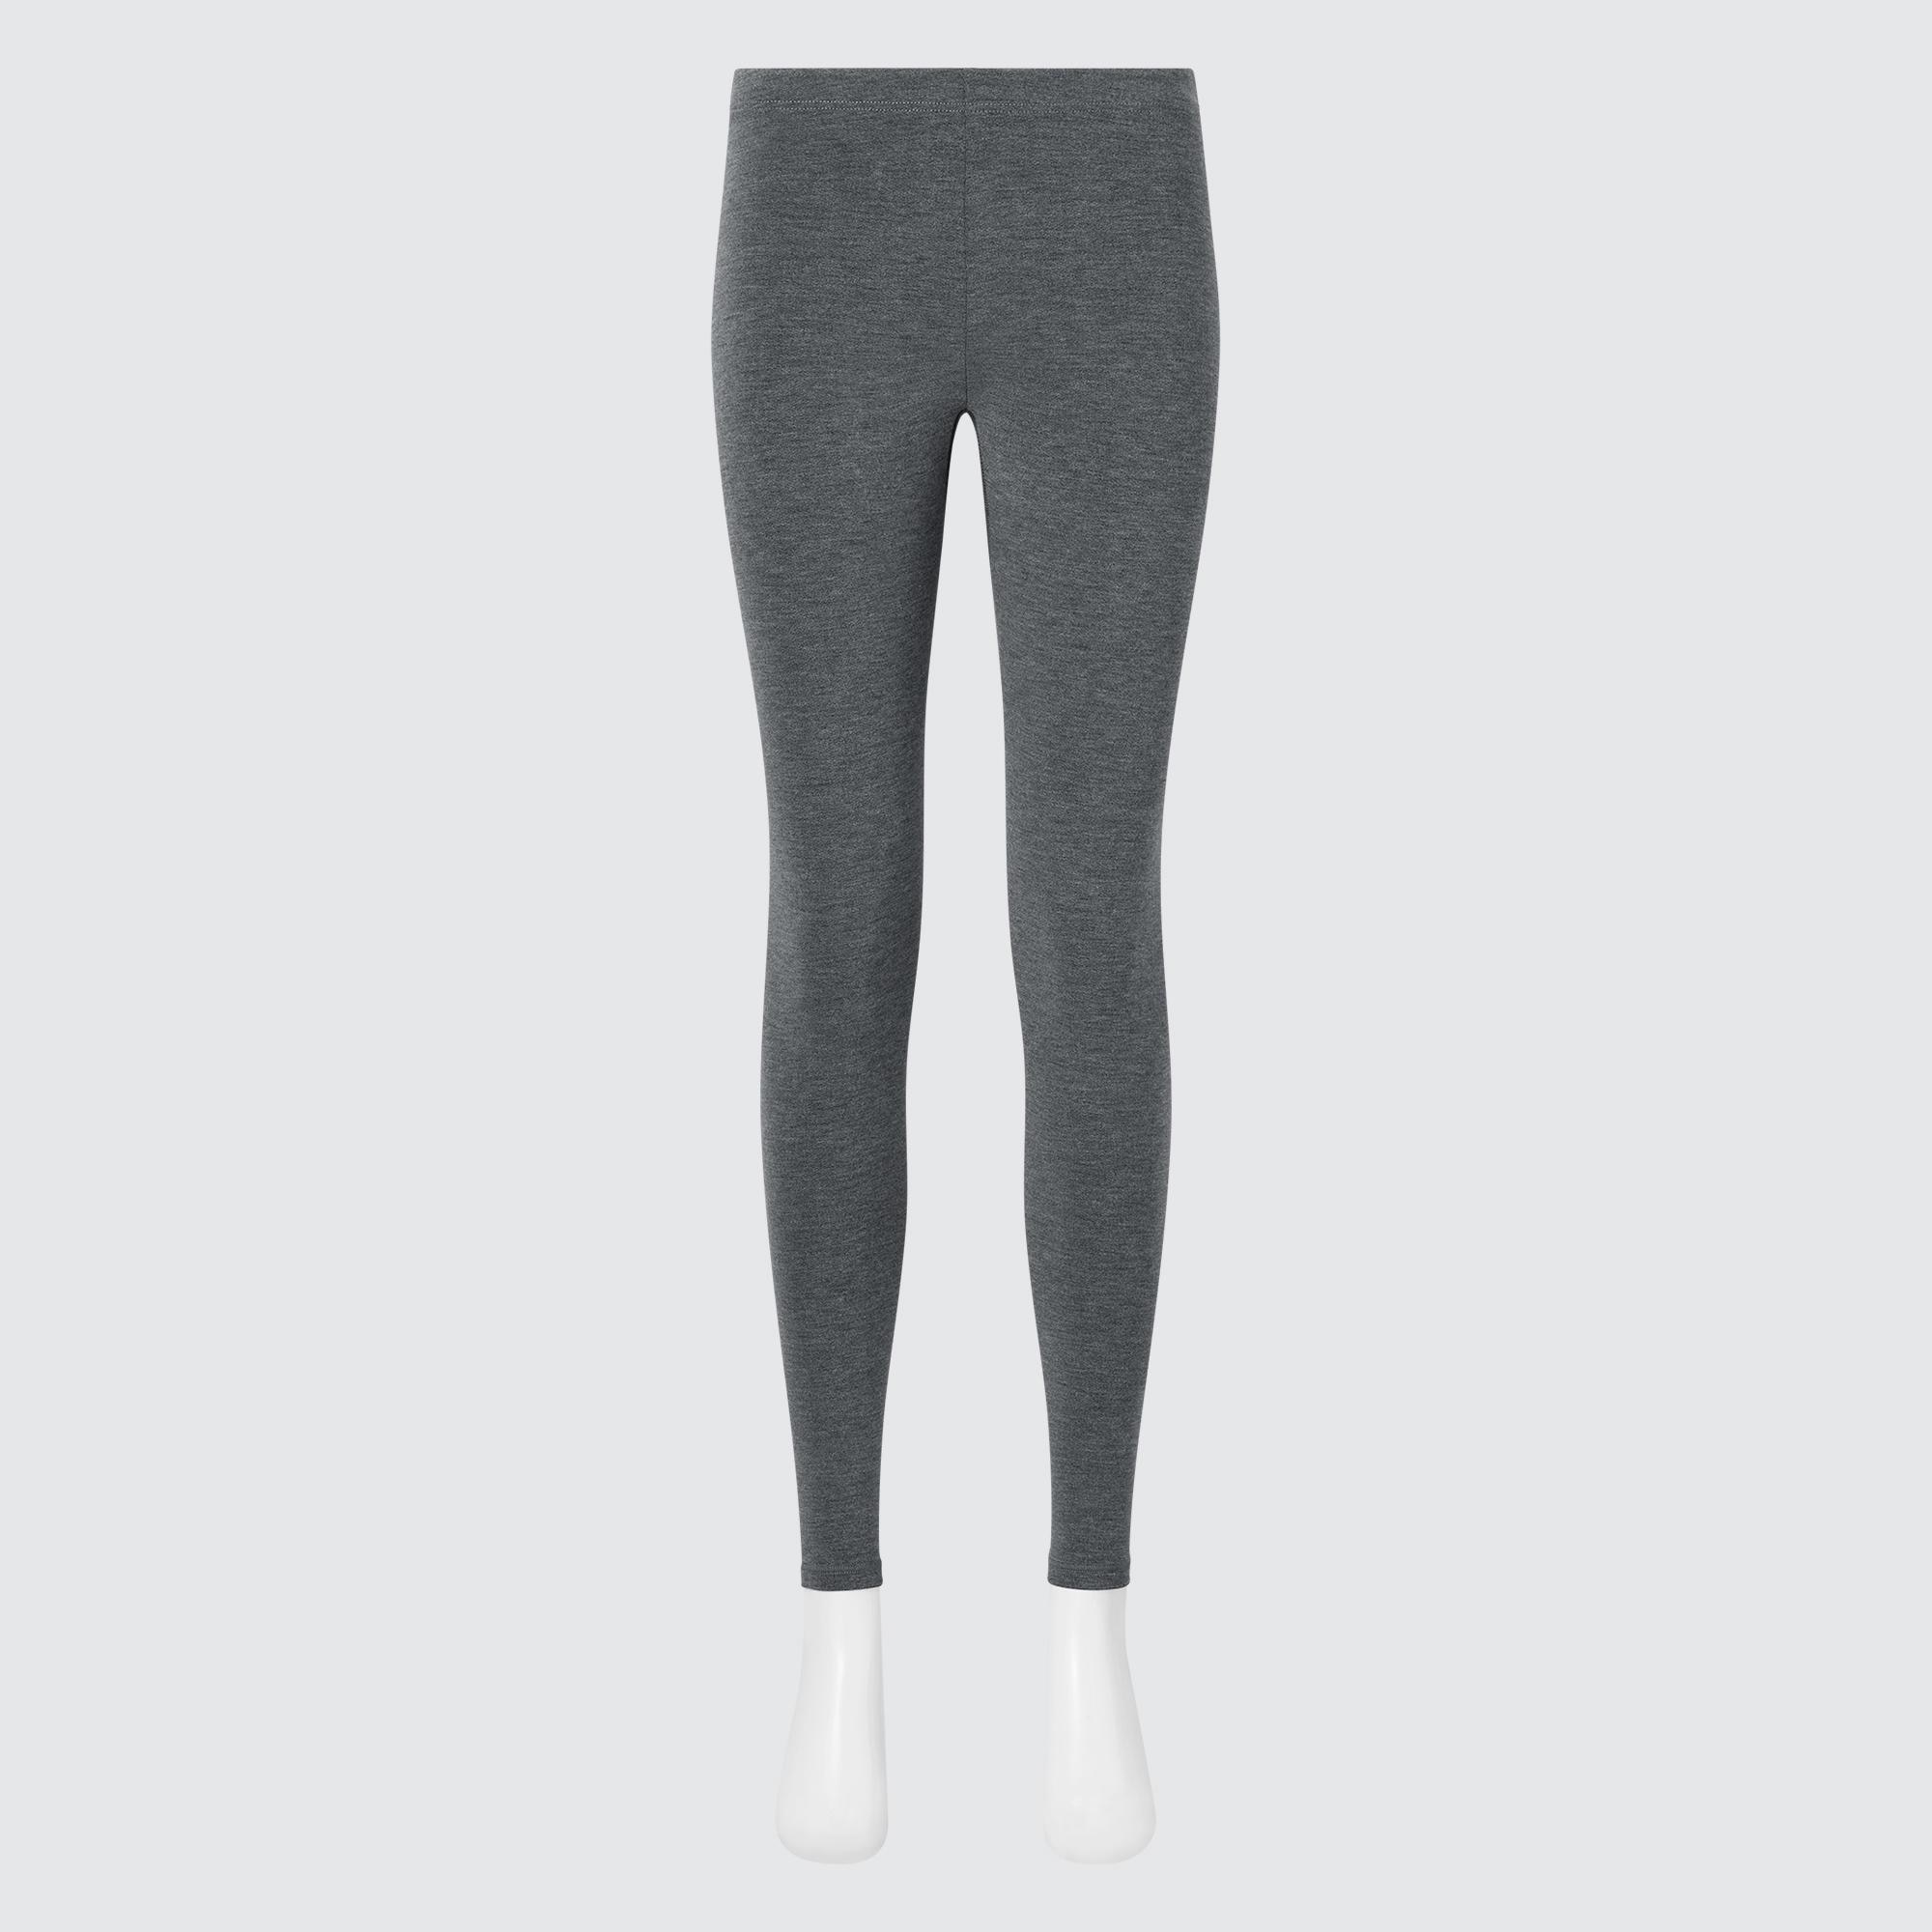 Viscose Sherpa Lined Full Winter Thermal Leggings by C'est Moi - SALE –  Great Sox